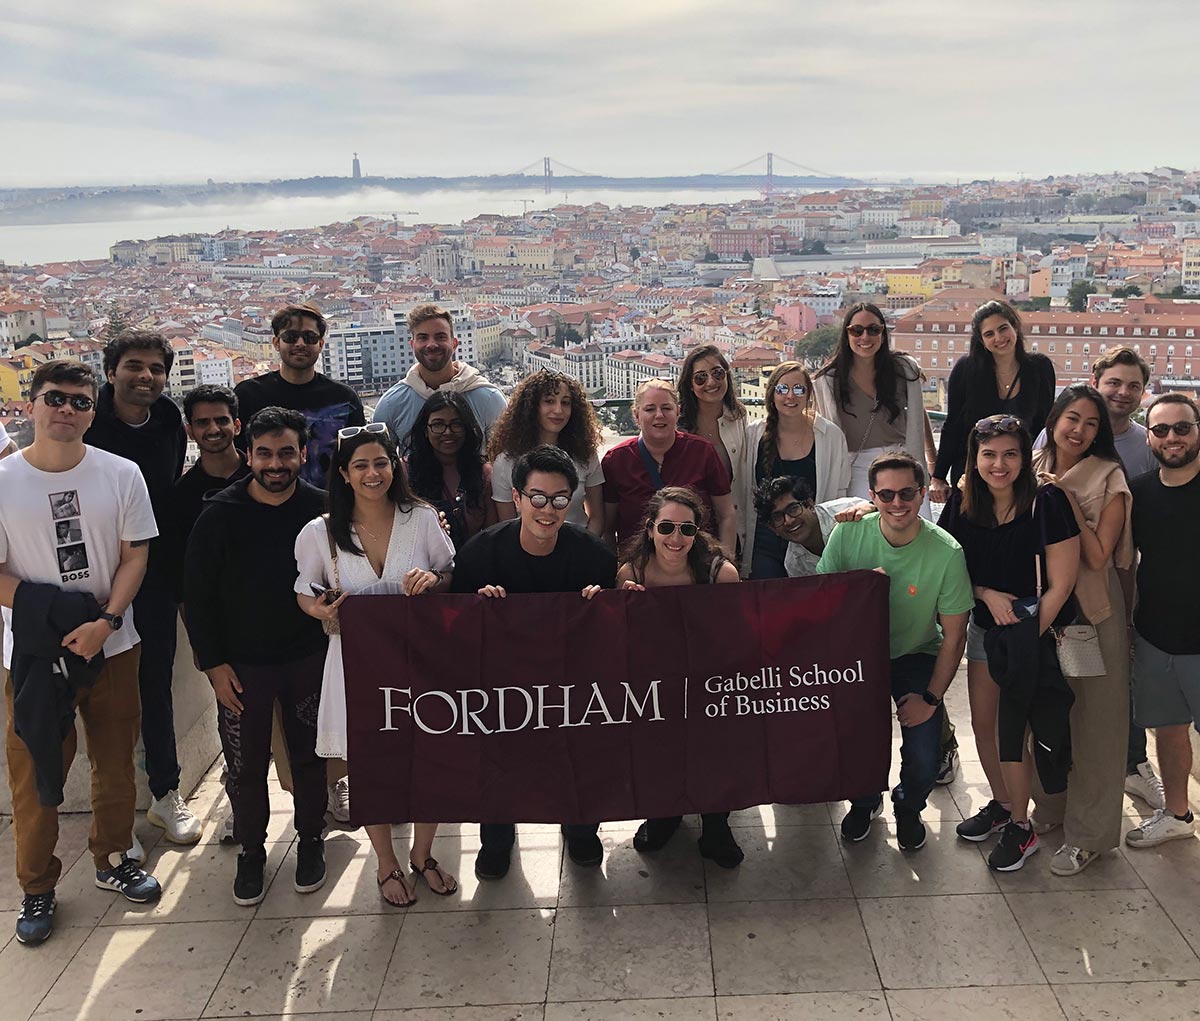 Full-time MBA students from Fordham Gabelli School of Business visited agricultural leaders, fintech firms, and business startups in Portugal as they all gather together outside smiling and posing for a picture while a few individuals in the front hold a dark burgundy Fordham Gabelli School of Business banner flag.